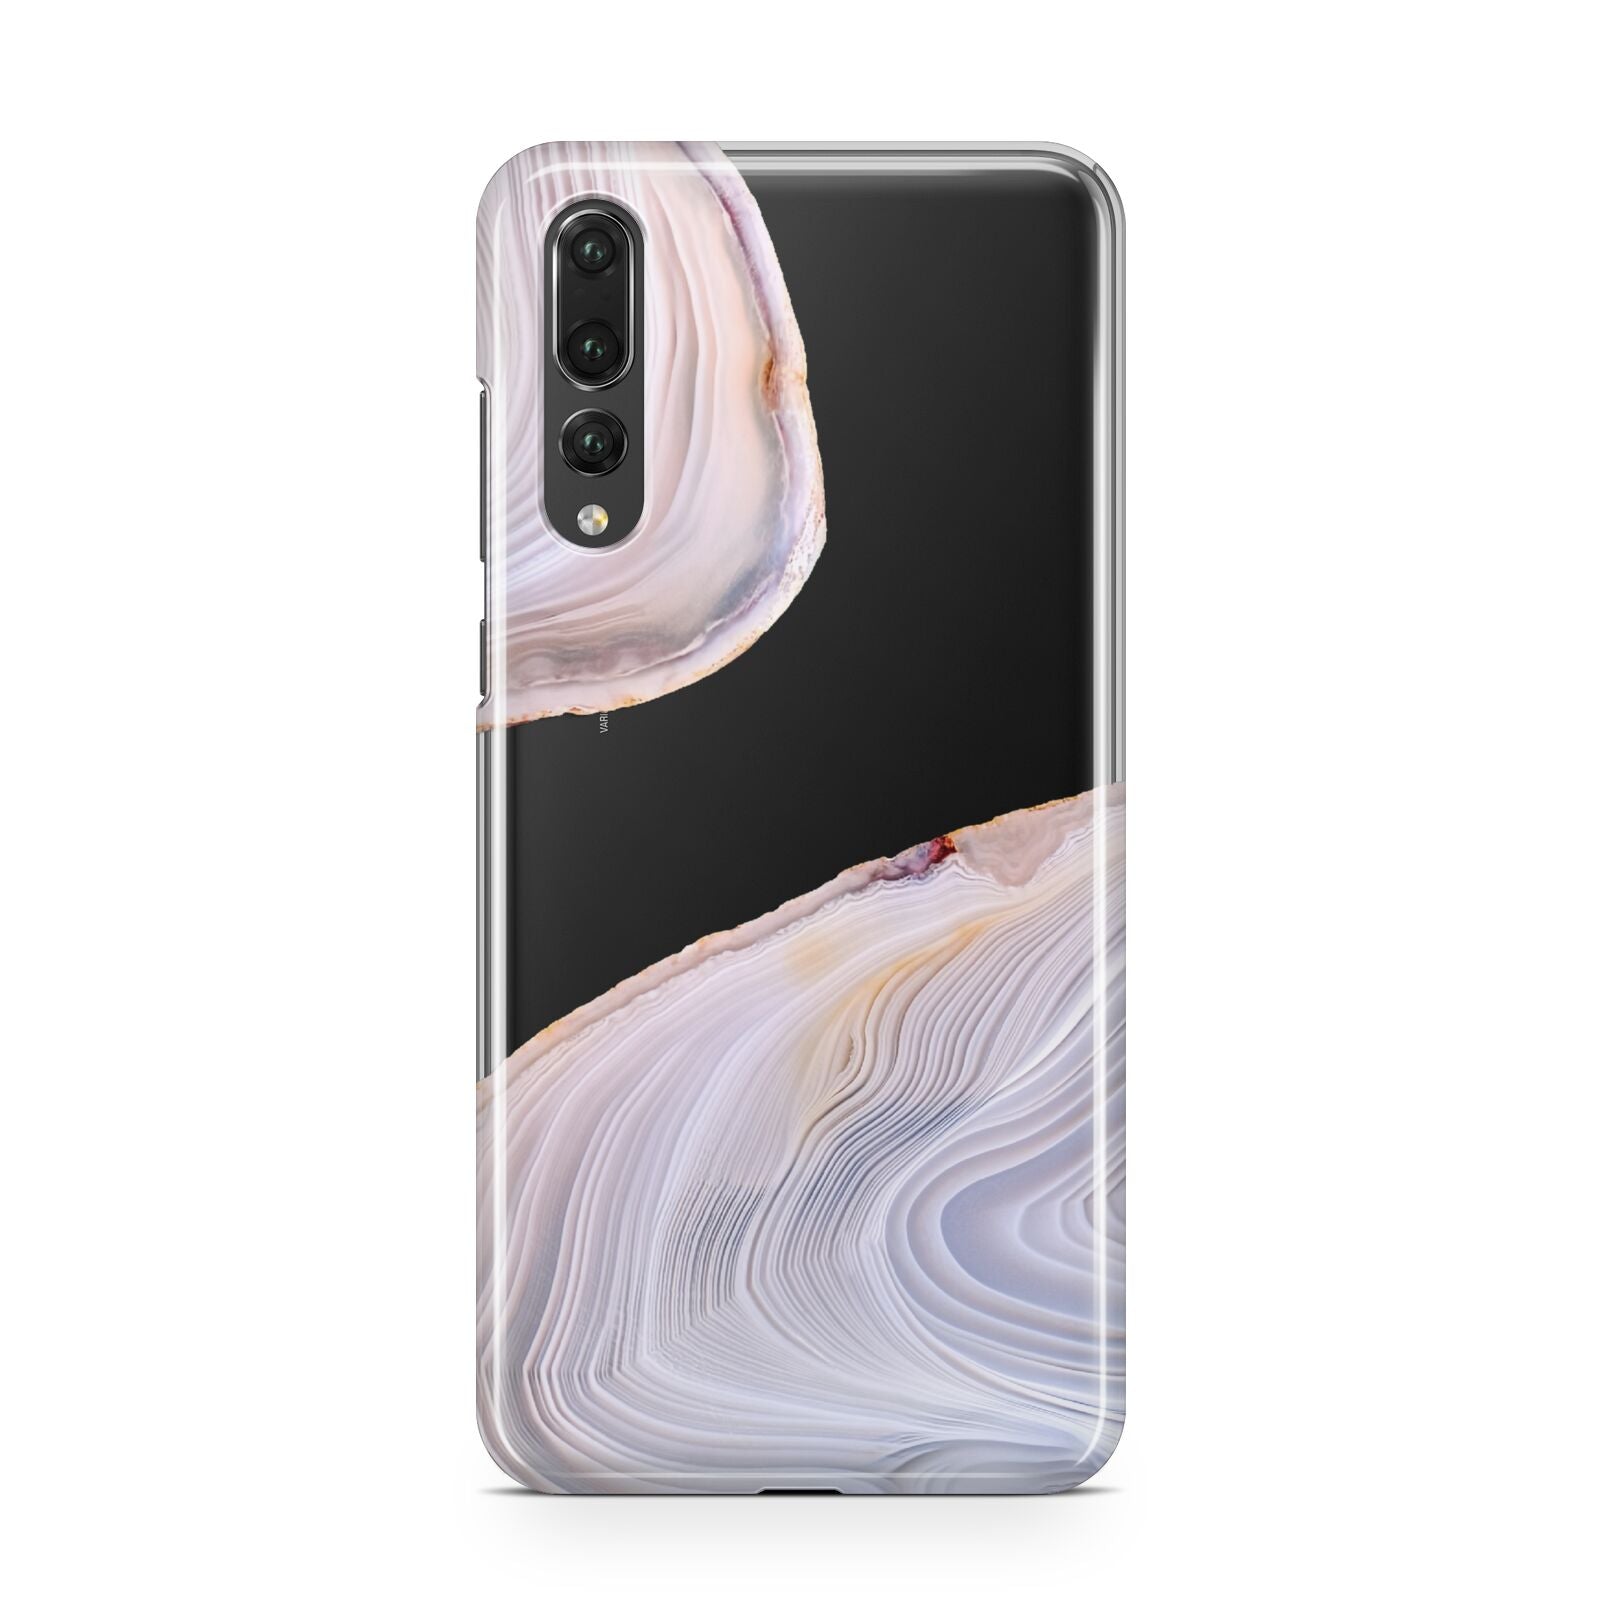 Agate Pale Pink and Blue Huawei P20 Pro Phone Case